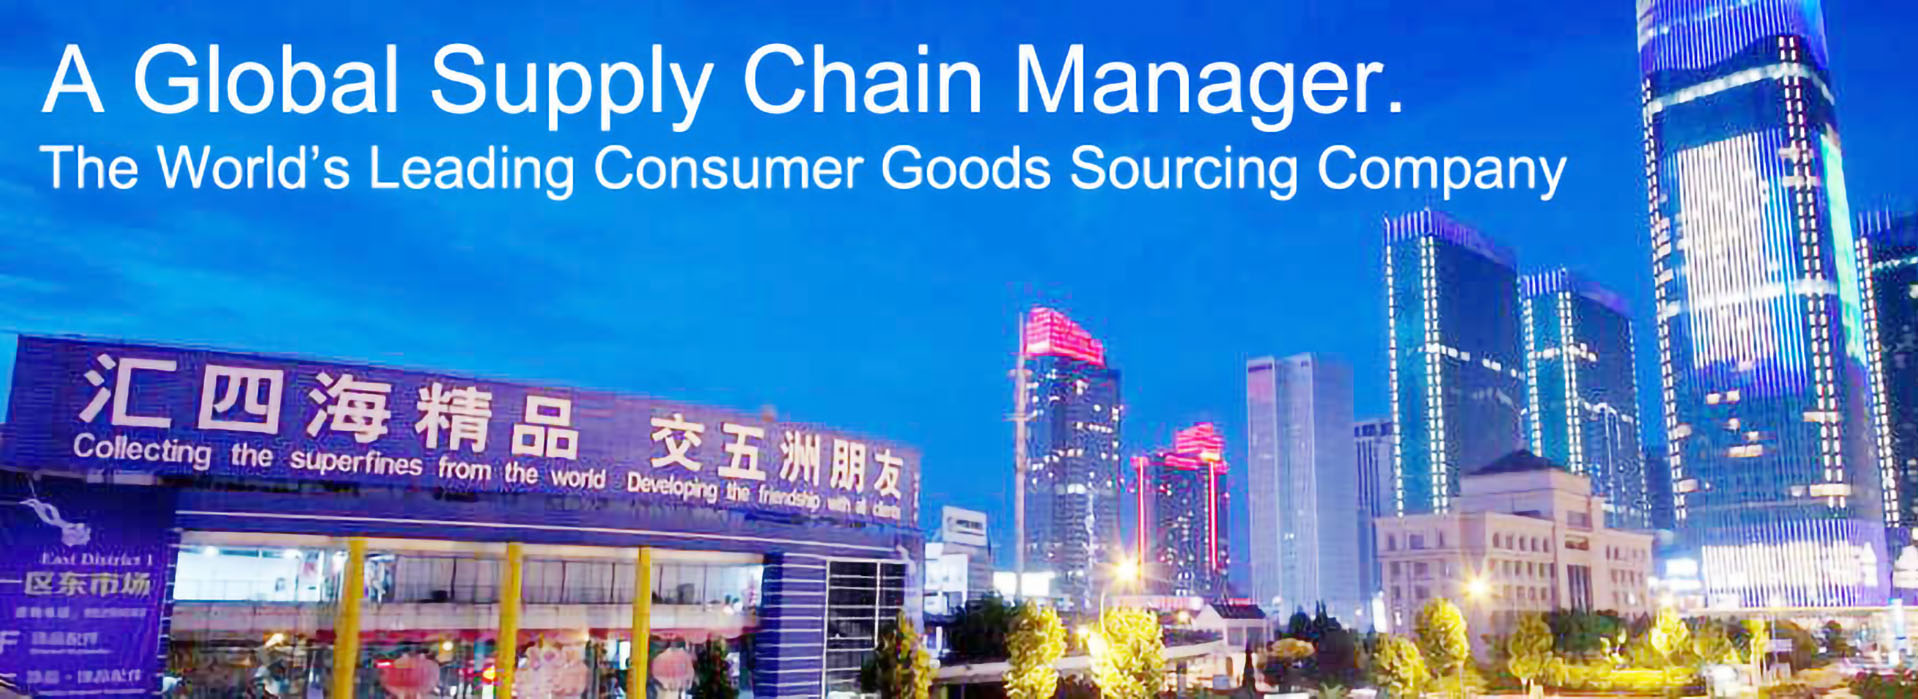 Chinese Sourcing Company  Strategic Business Partner in China - Yiwu Bazaar